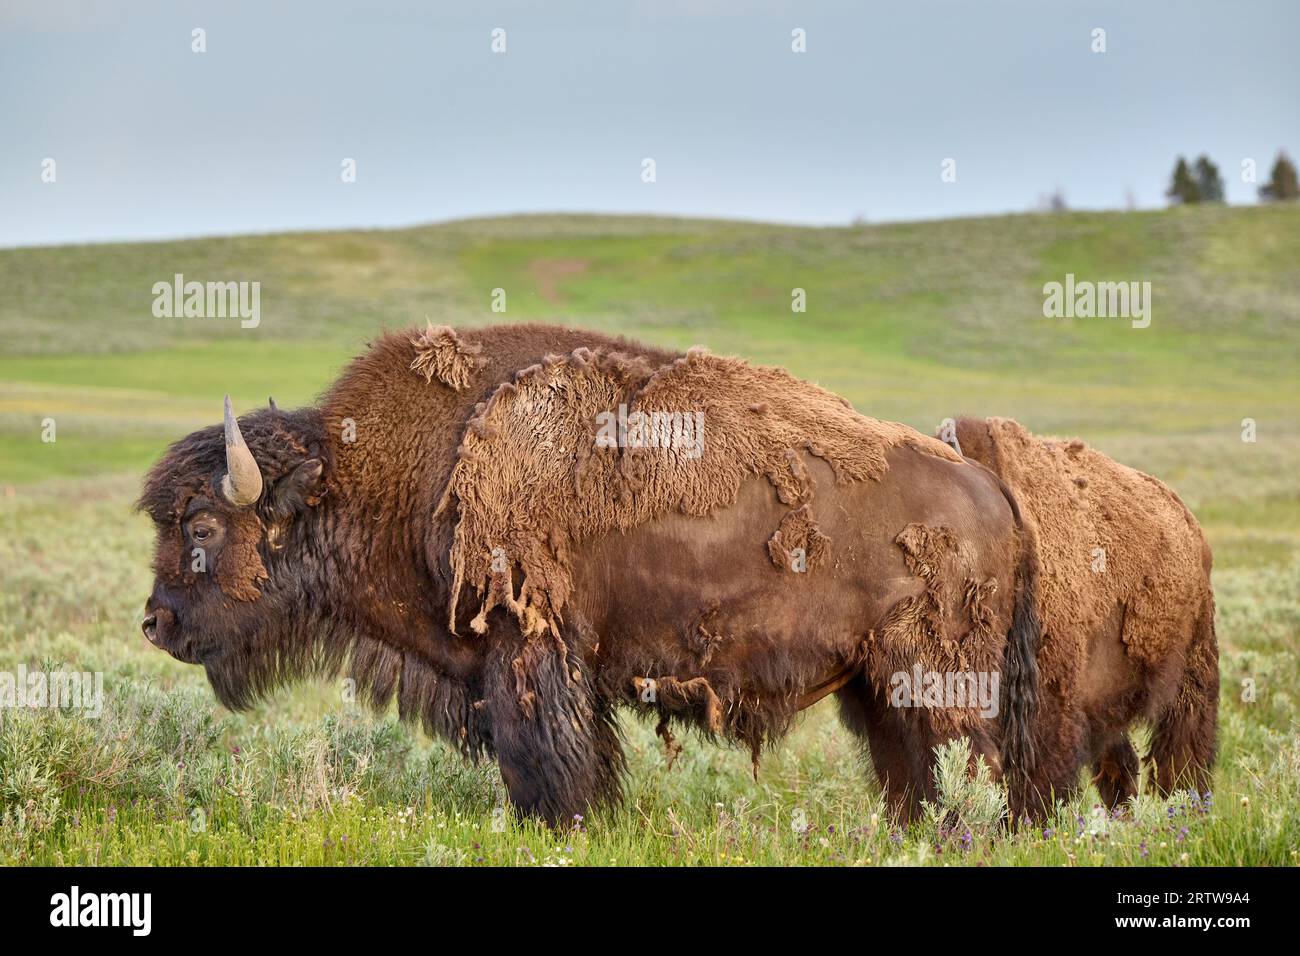 American bison (Bison bison), Yellowstone National Park, Wyoming, United States of America Stock Photo